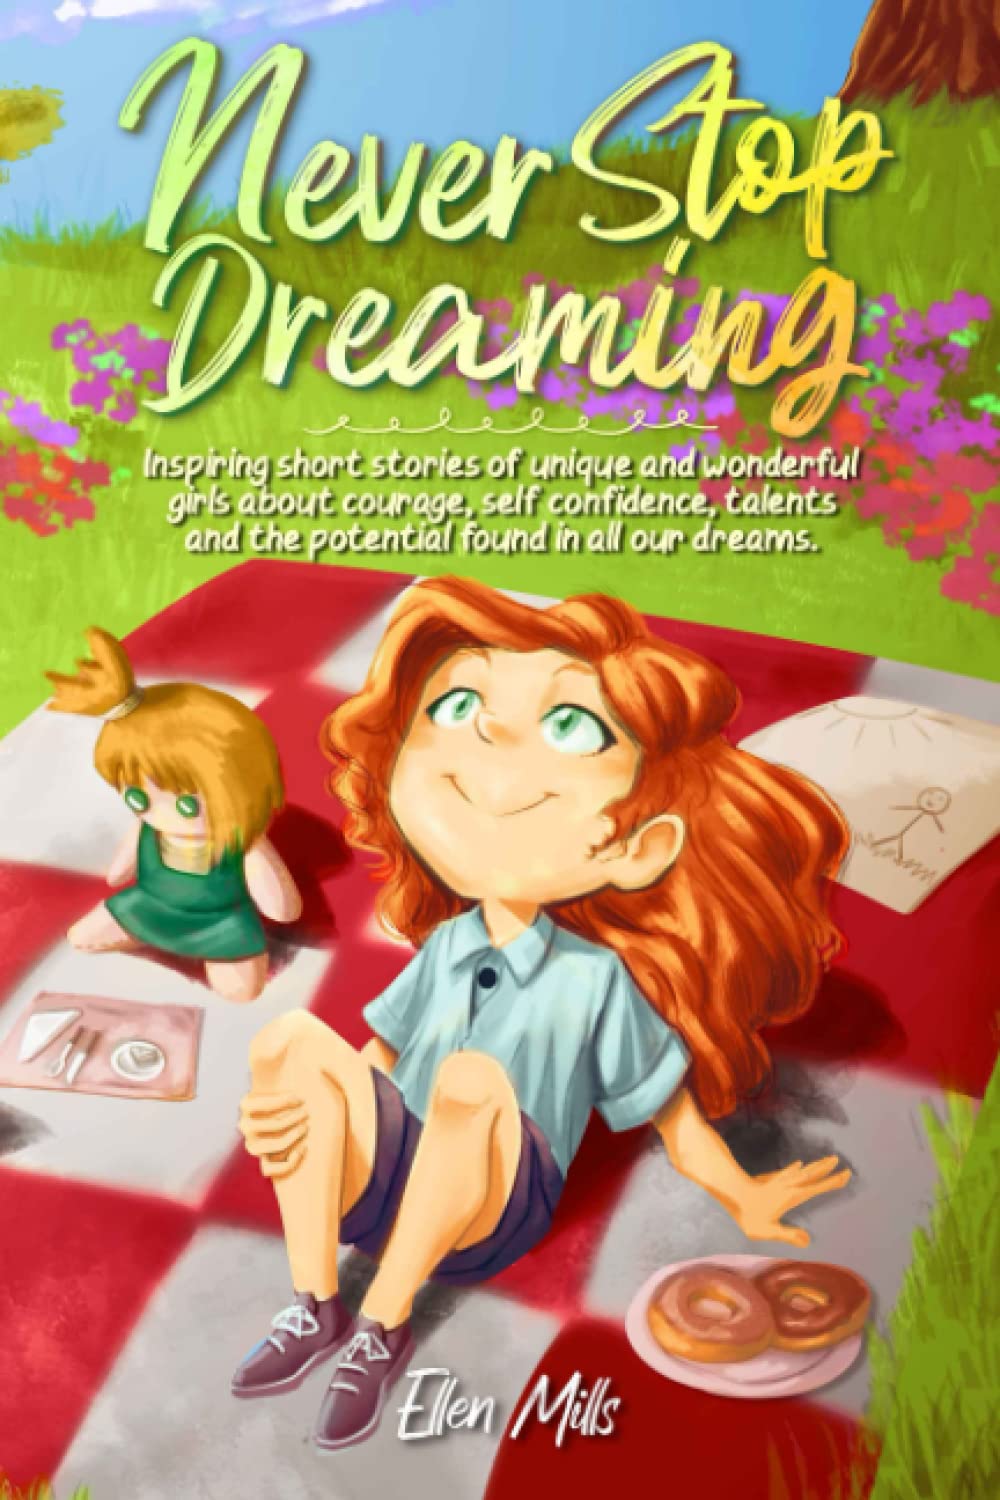 Never Stop Dreaming: Inspiring short stories of unique and wonderful girls about courage, self-confidence, talents, and the potential found in all our dreams (Motivational Books for Children)